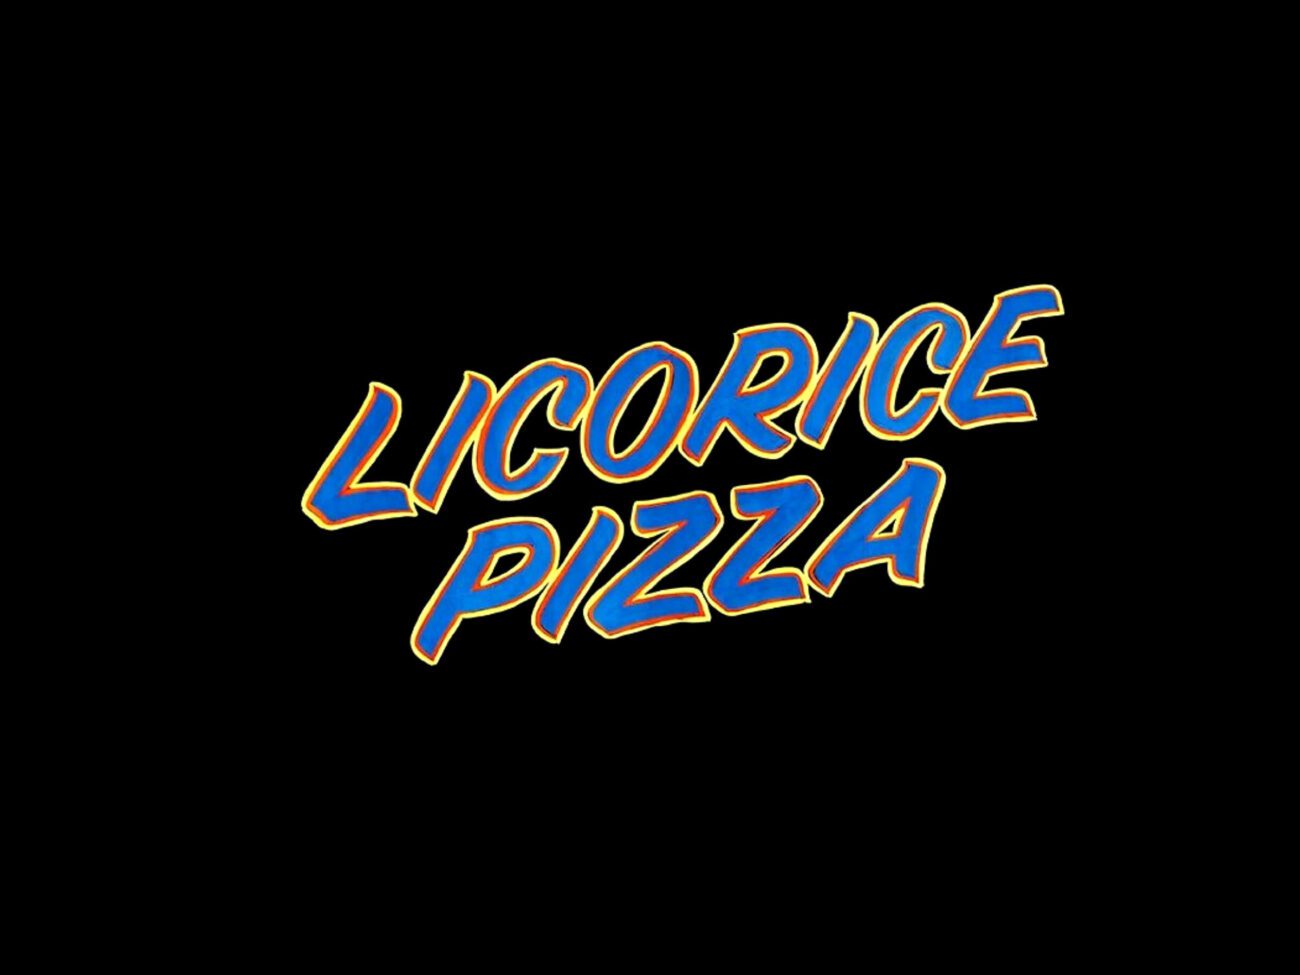 Critics are calling Paul Thomas Anderson's ninth movie, 'Licorice Pizza' one of his very best. Explore the heavy scrutiny the film faces today.